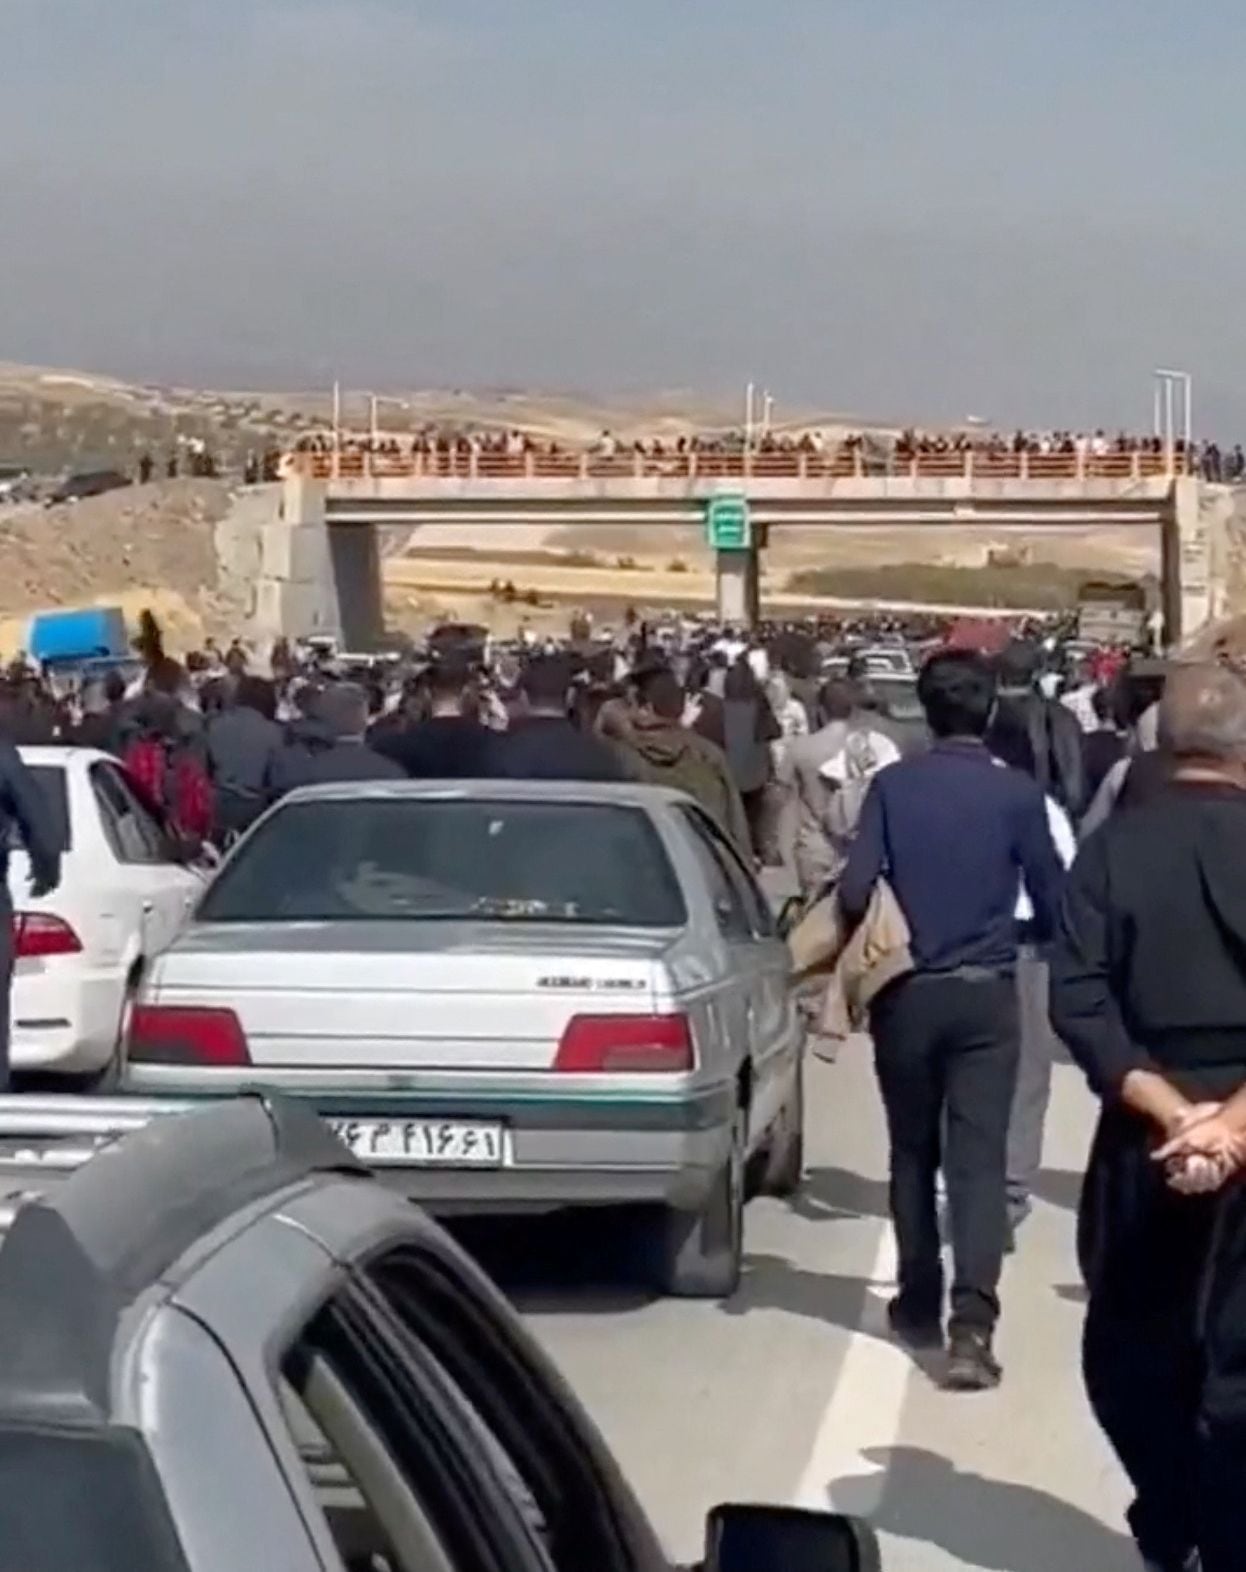 Some 10,000 people marched Friday in Saqqez, in Iranian Kurdistan, to the cemetery where Mahsa Amini was buried, in another open challenge to the regime.